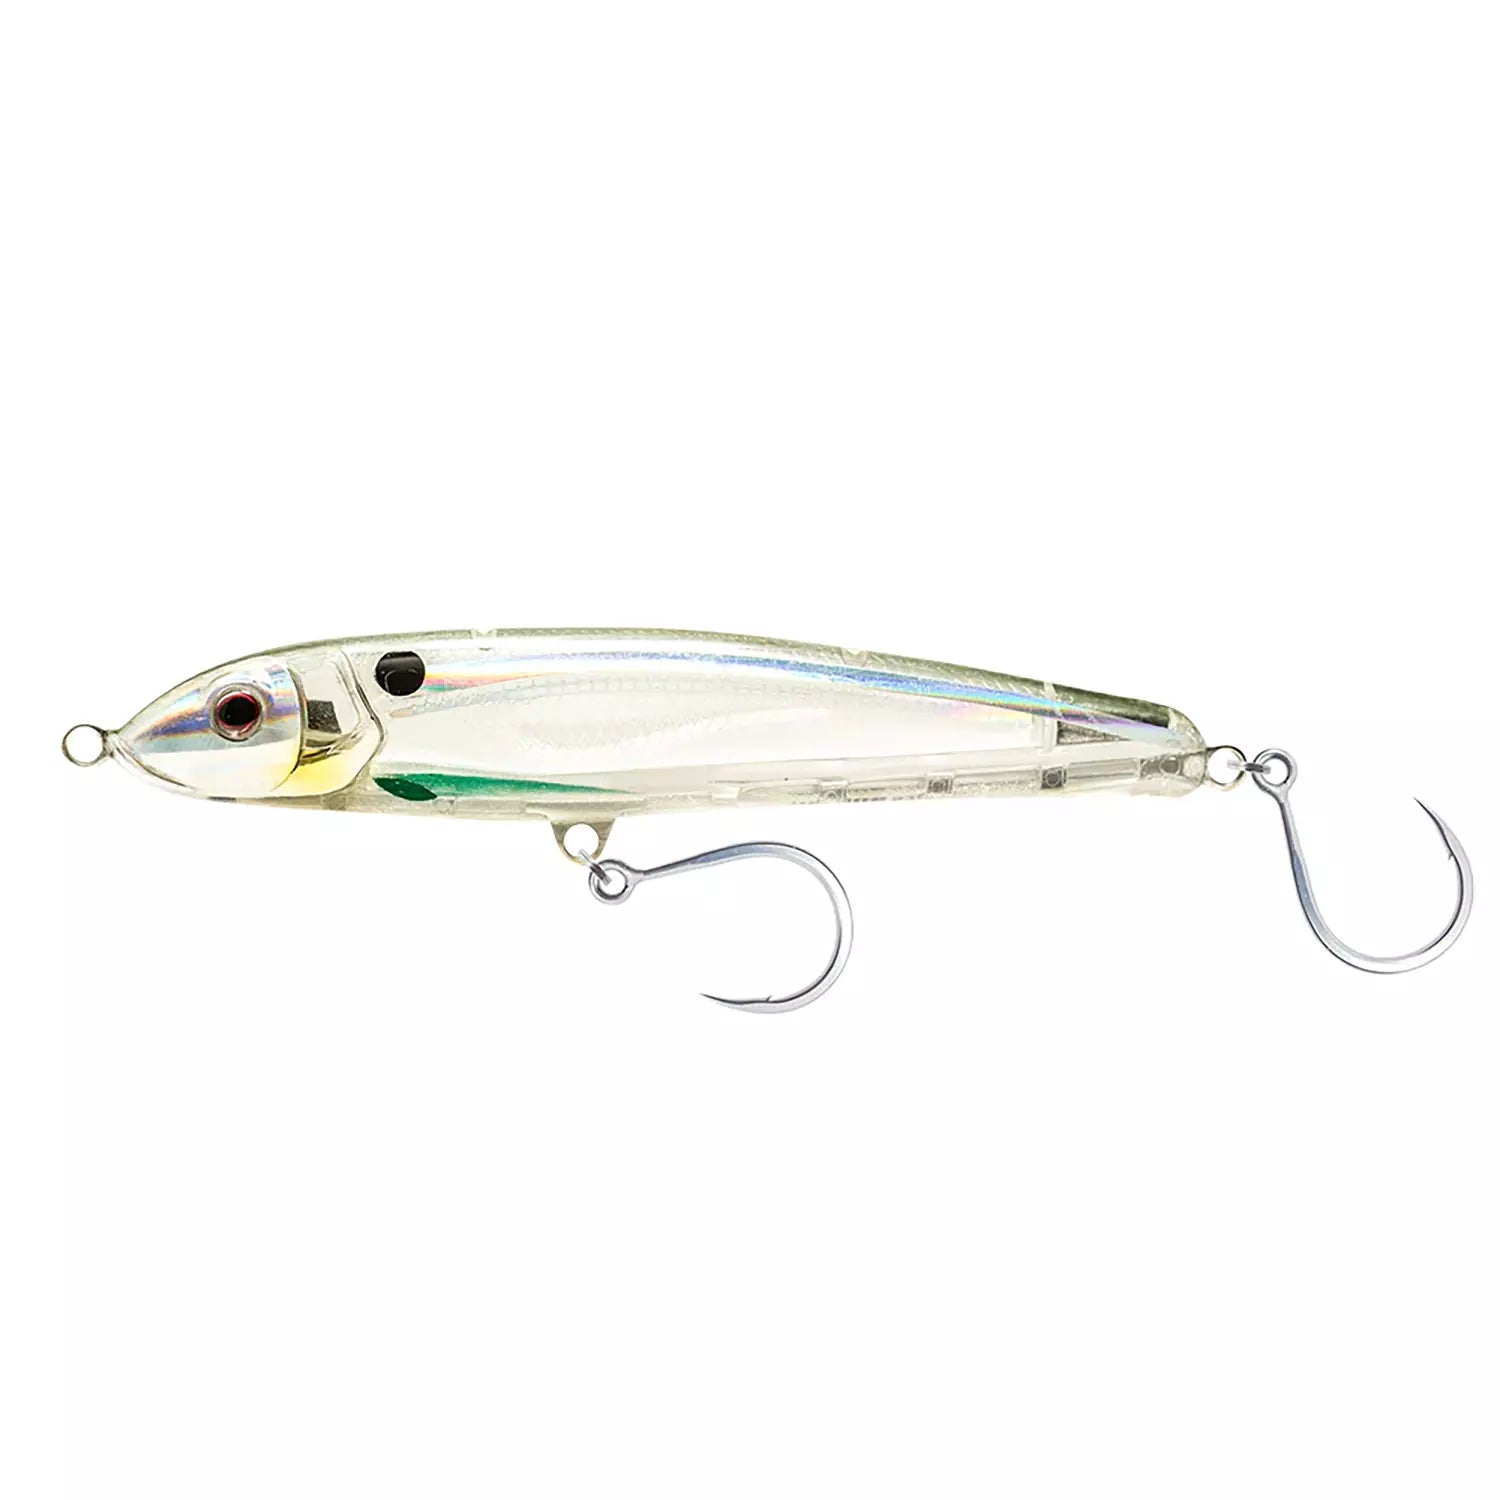 Nomad Design Riptide Slow Sink Lure-Lure - Poppers, Stickbaits & Pencils-Nomad-200mm-Holo Ghost Shad-Fishing Station